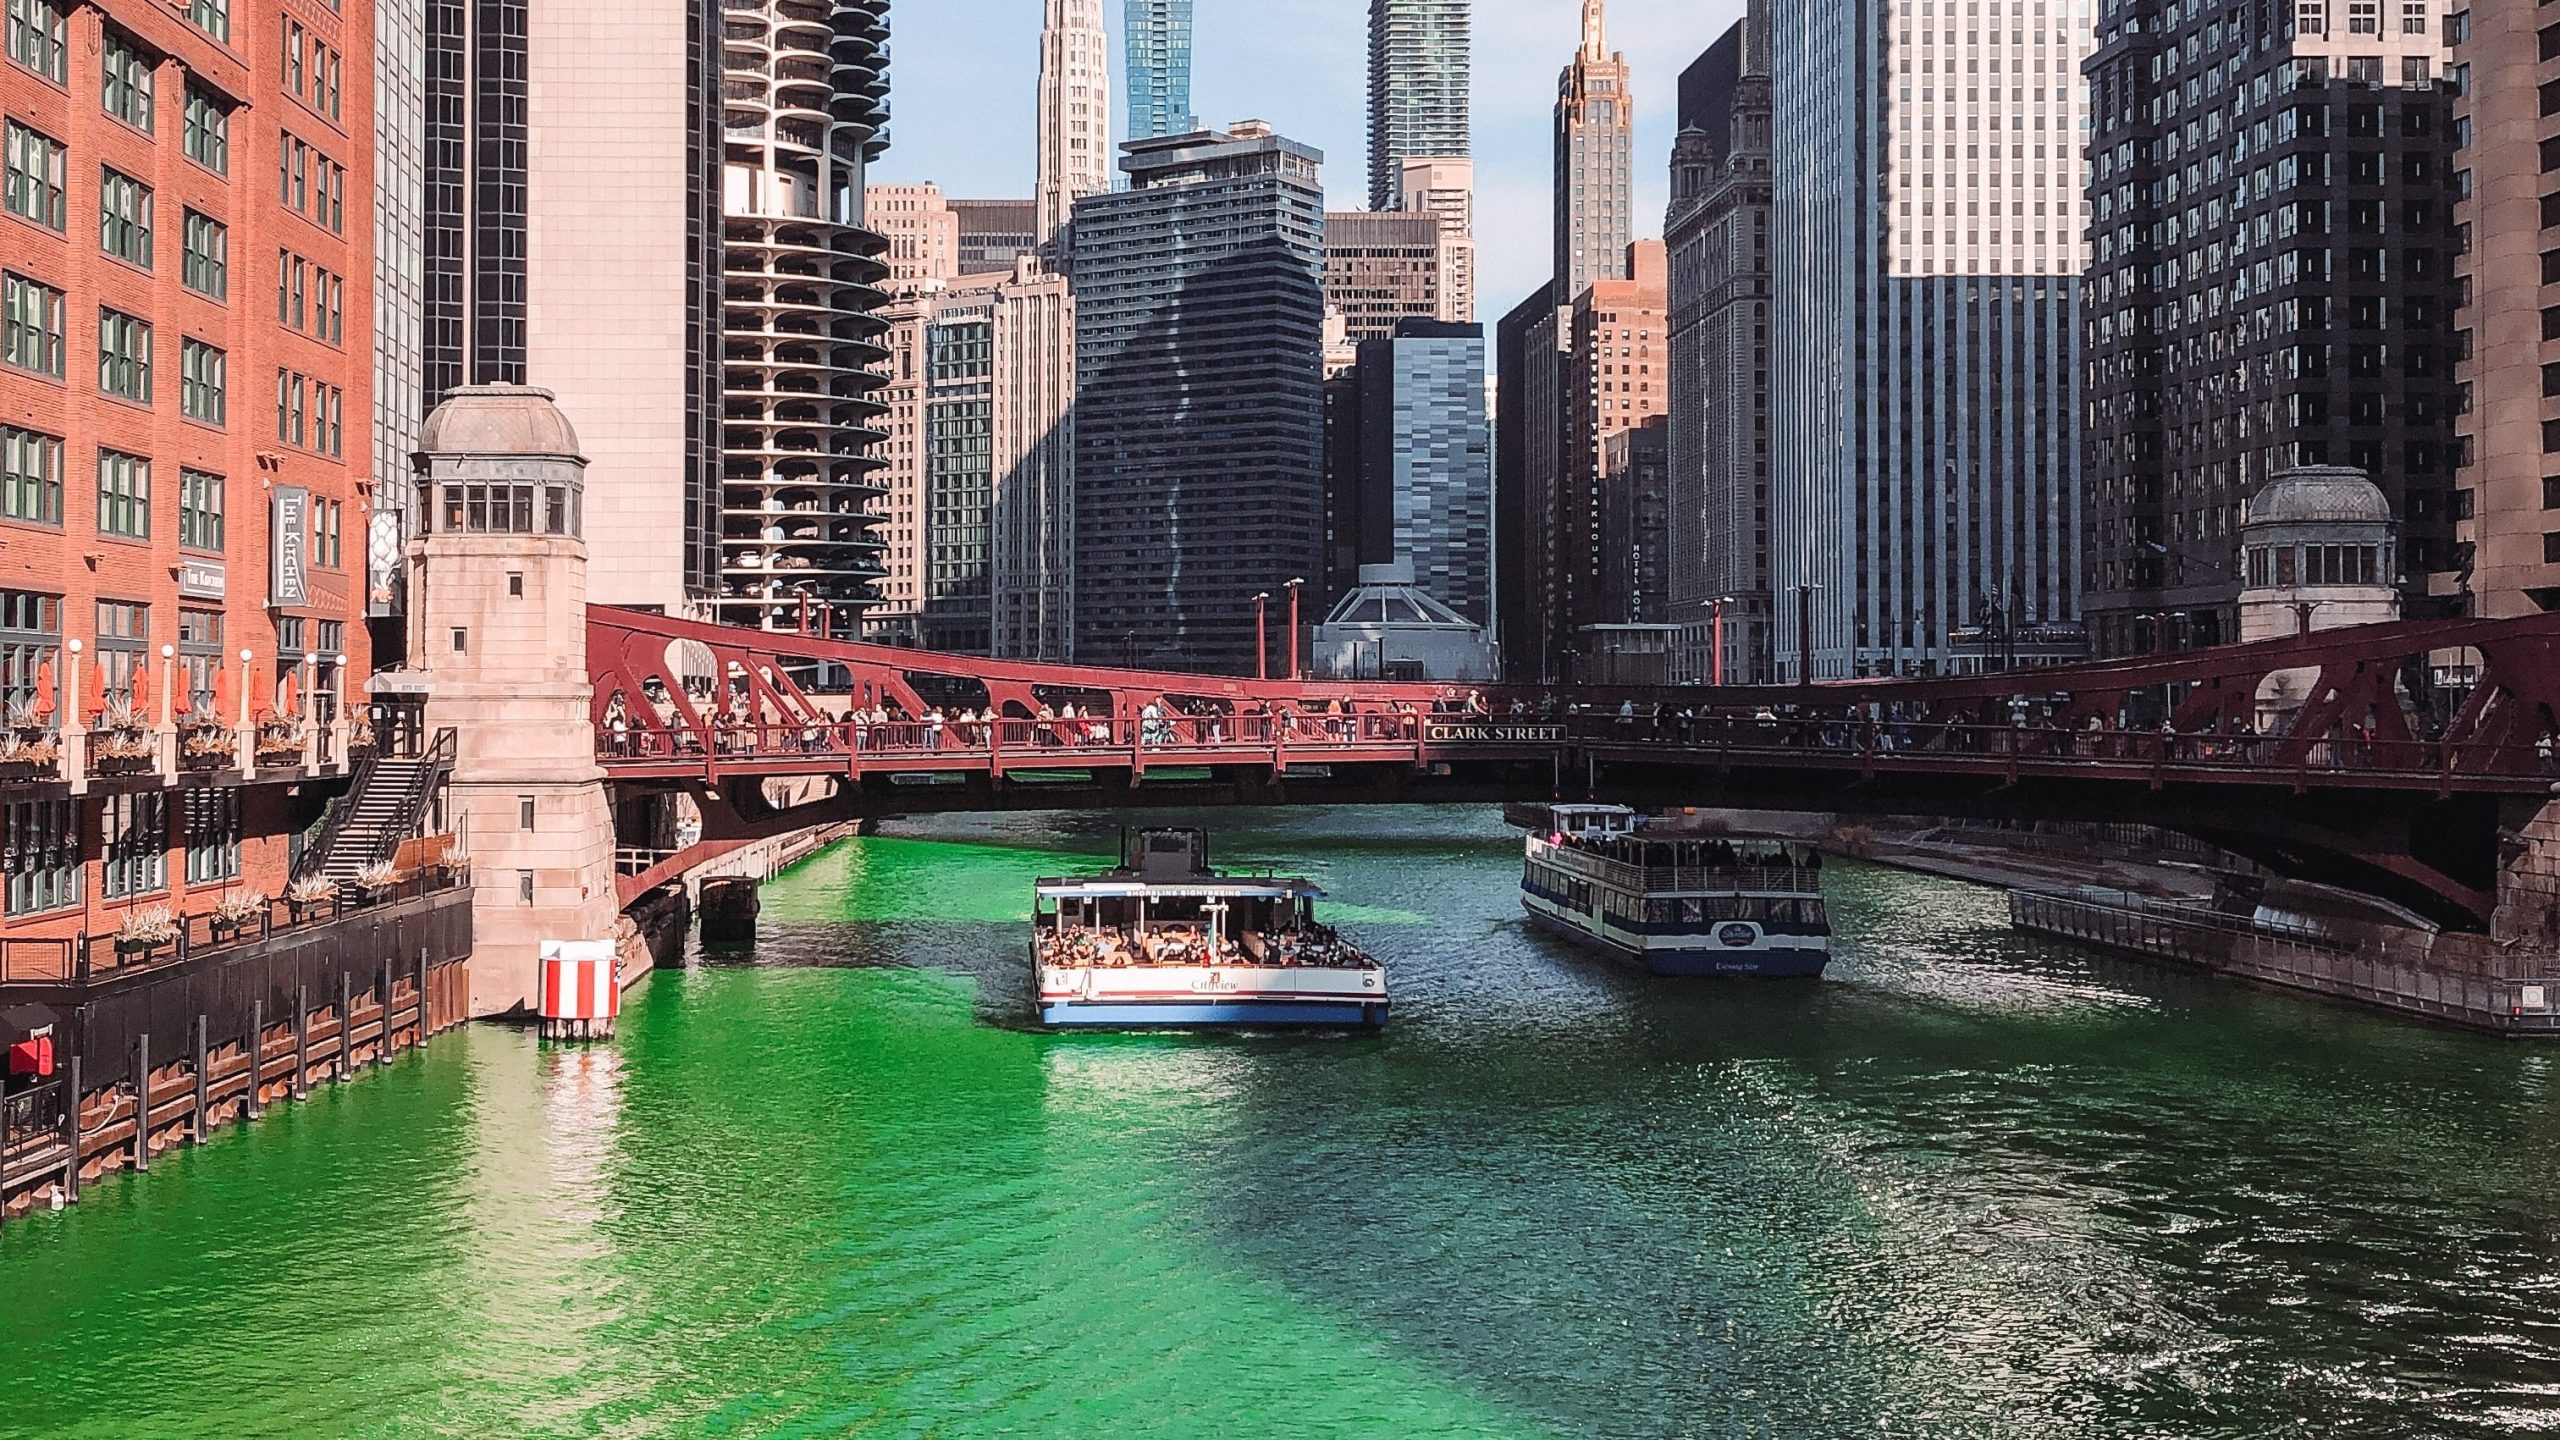 Chicago's river dyed green for St. Patrick's Day celebrations.